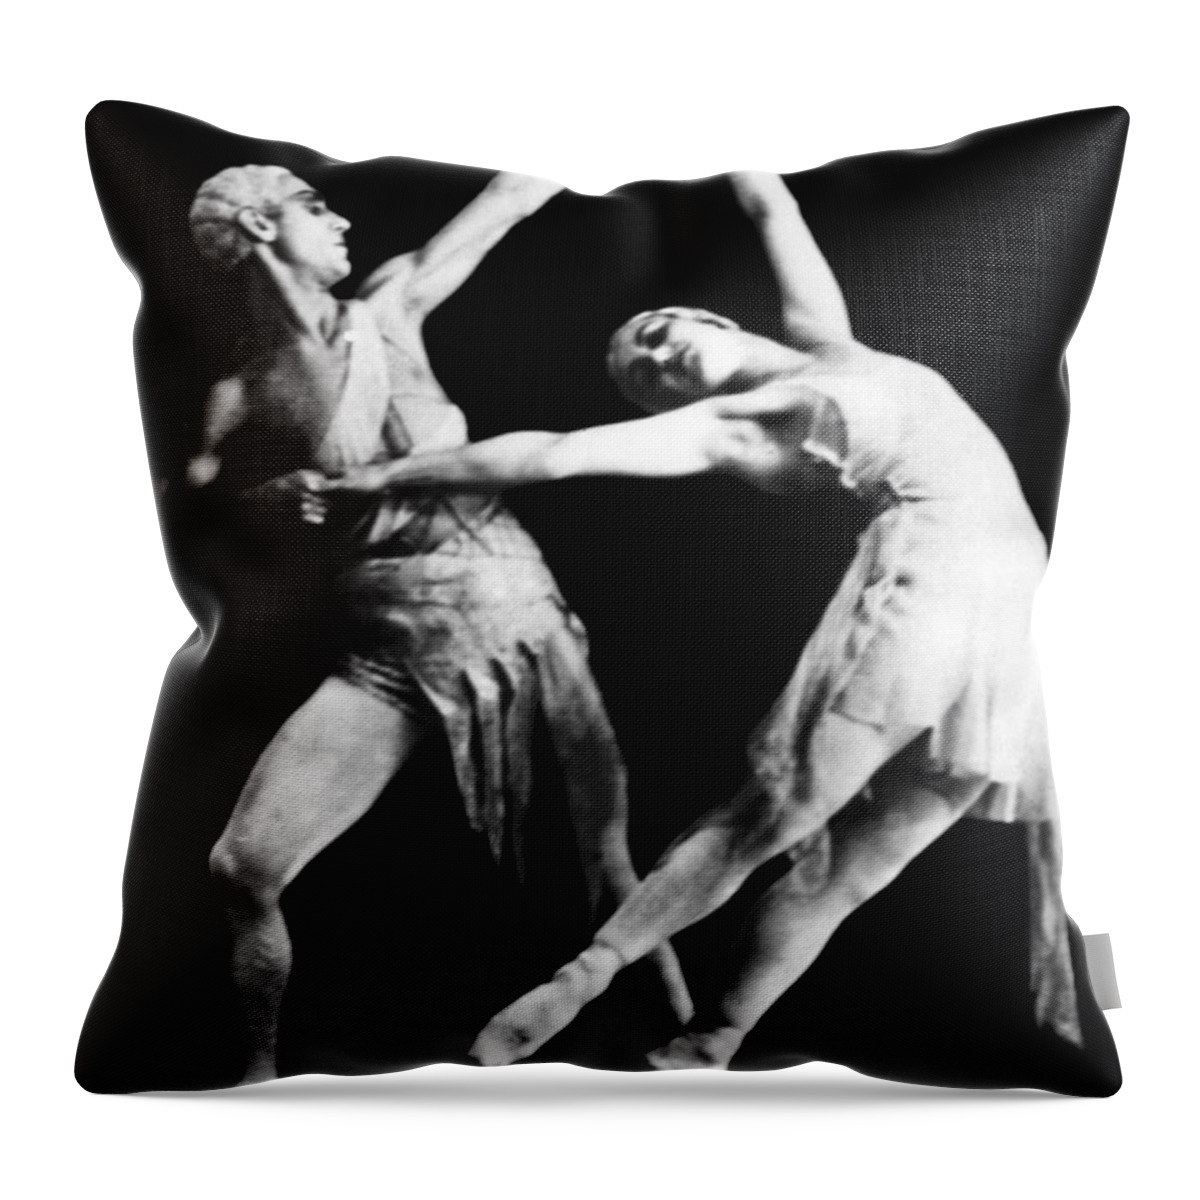 1936 Throw Pillow featuring the photograph Moscow Opera Ballet Dancers by Underwood Archives